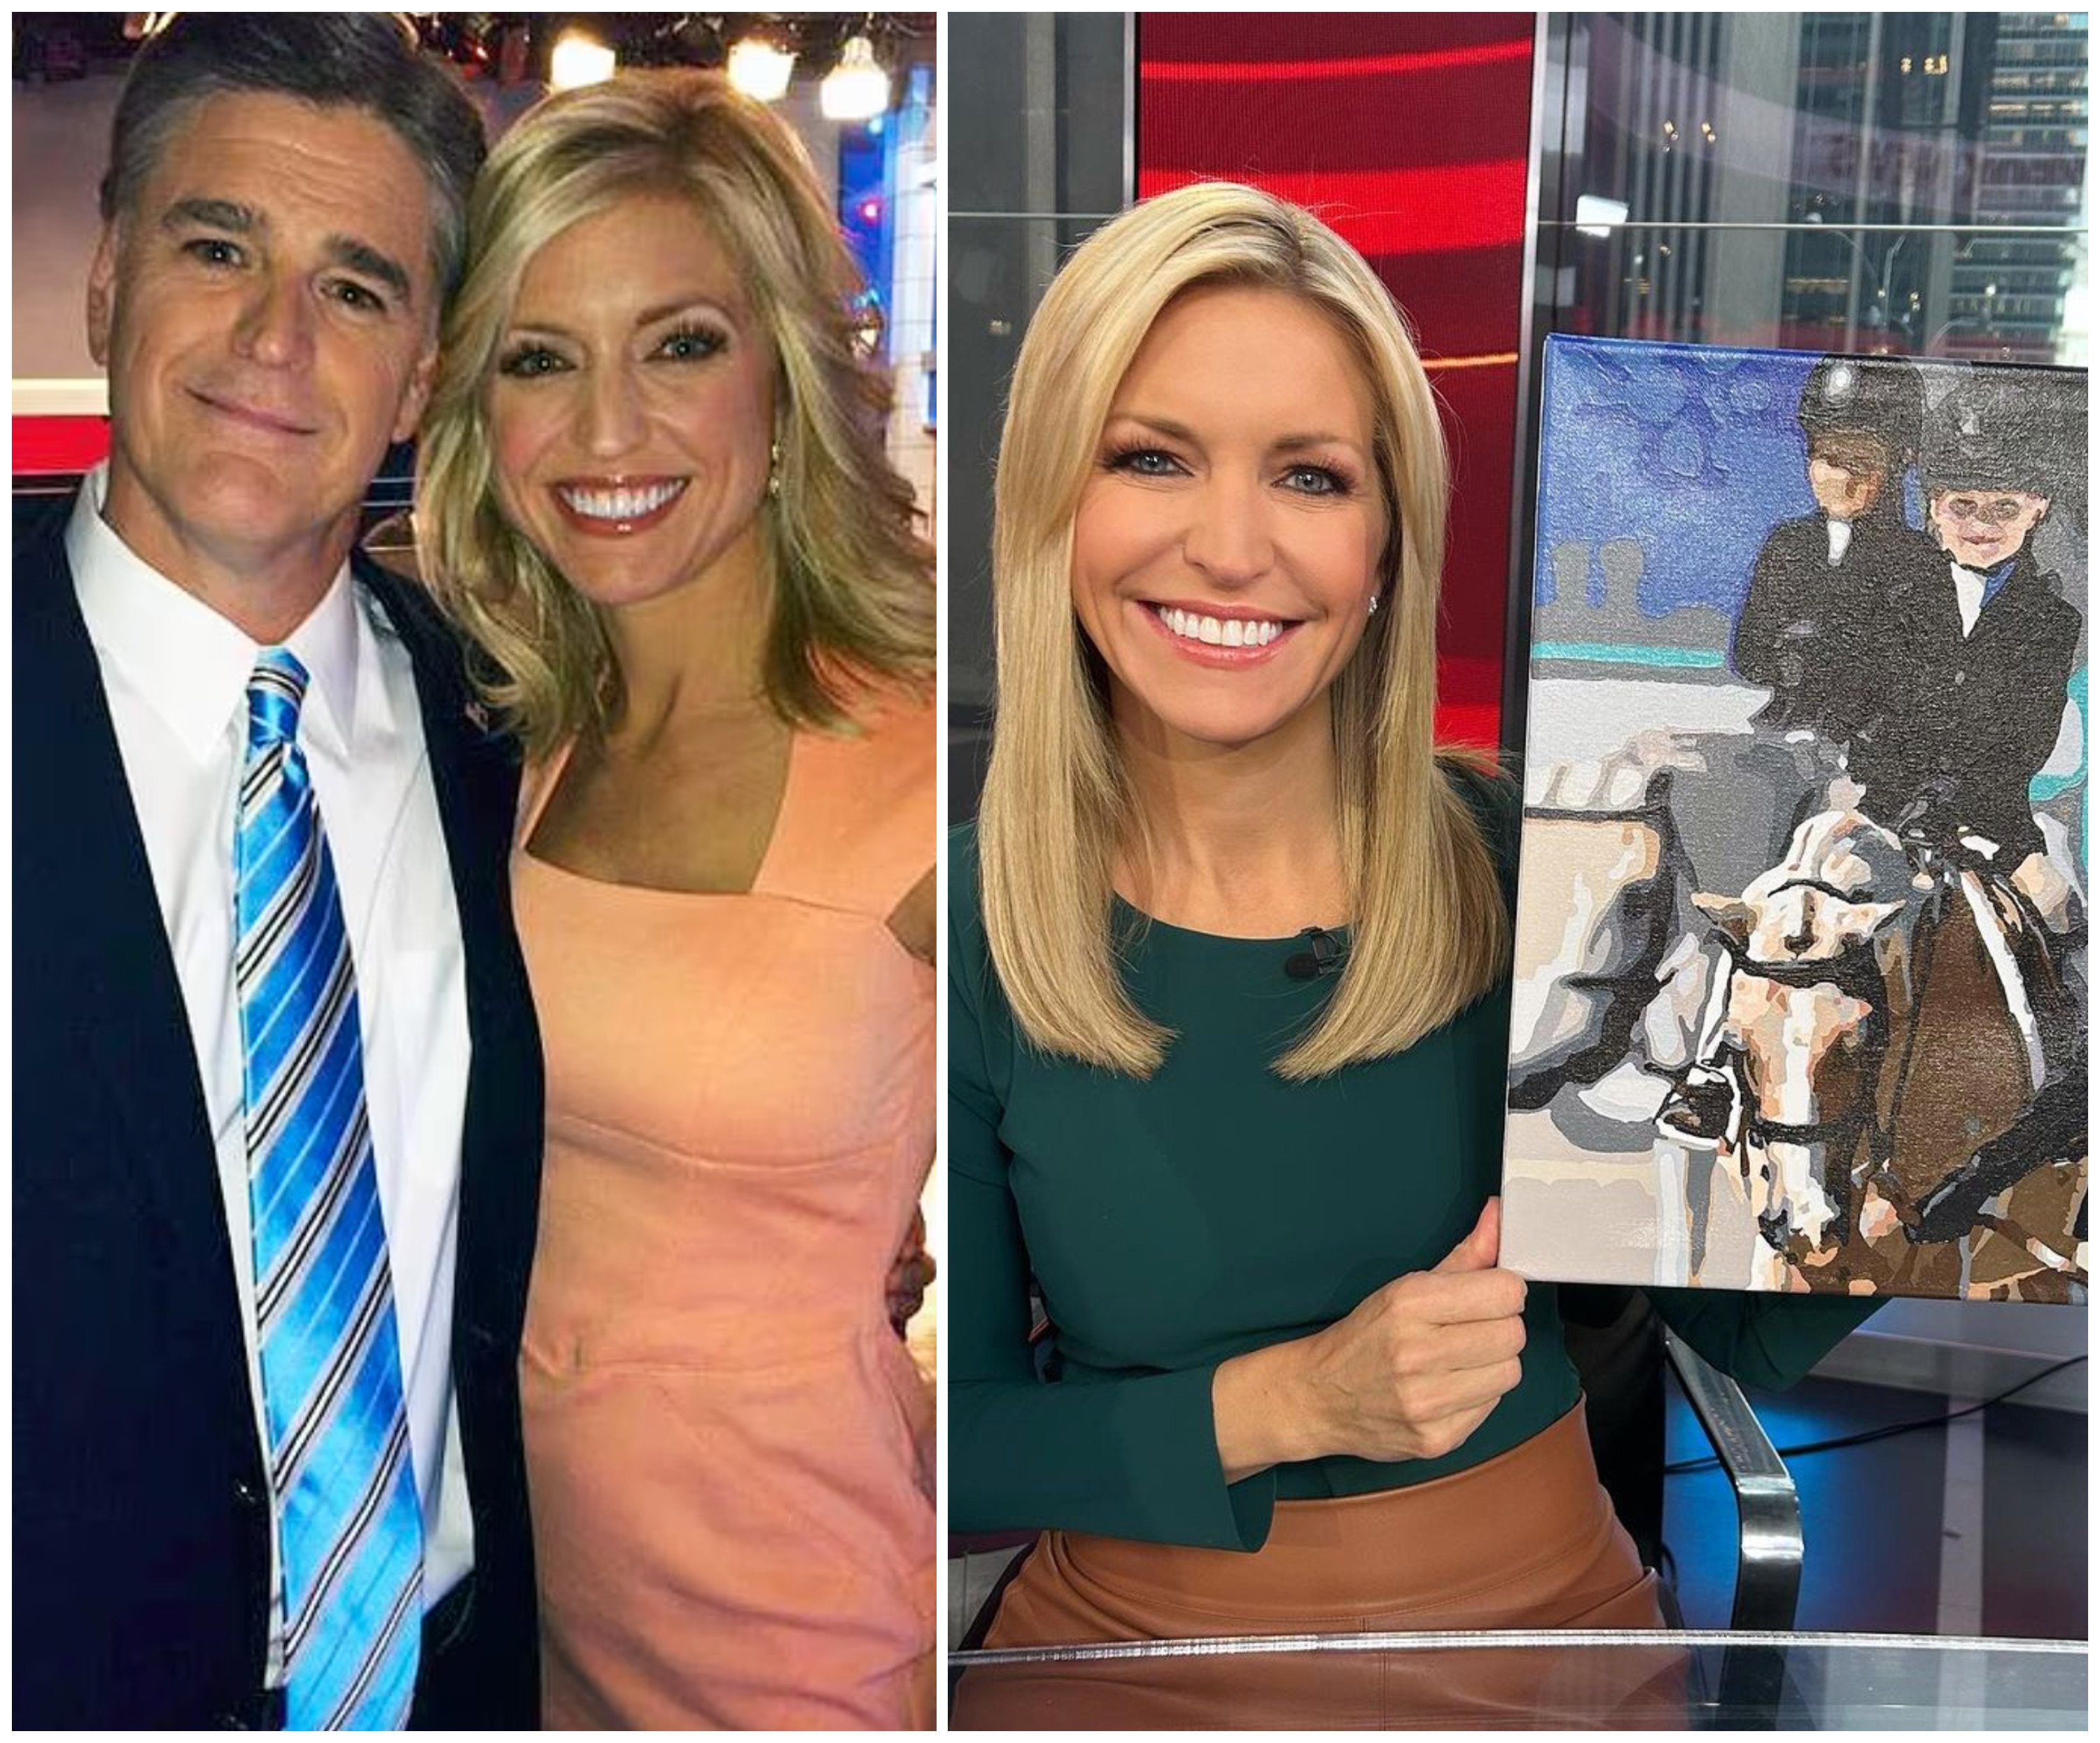 Sean Hannity and Ainsley Earhardt have been linked since 2020, but photos of the pair taken in April 2023 seemed to confirm the romance. Photos: Ainsley Earhardt/Facebook, @aearhardt/Instagram